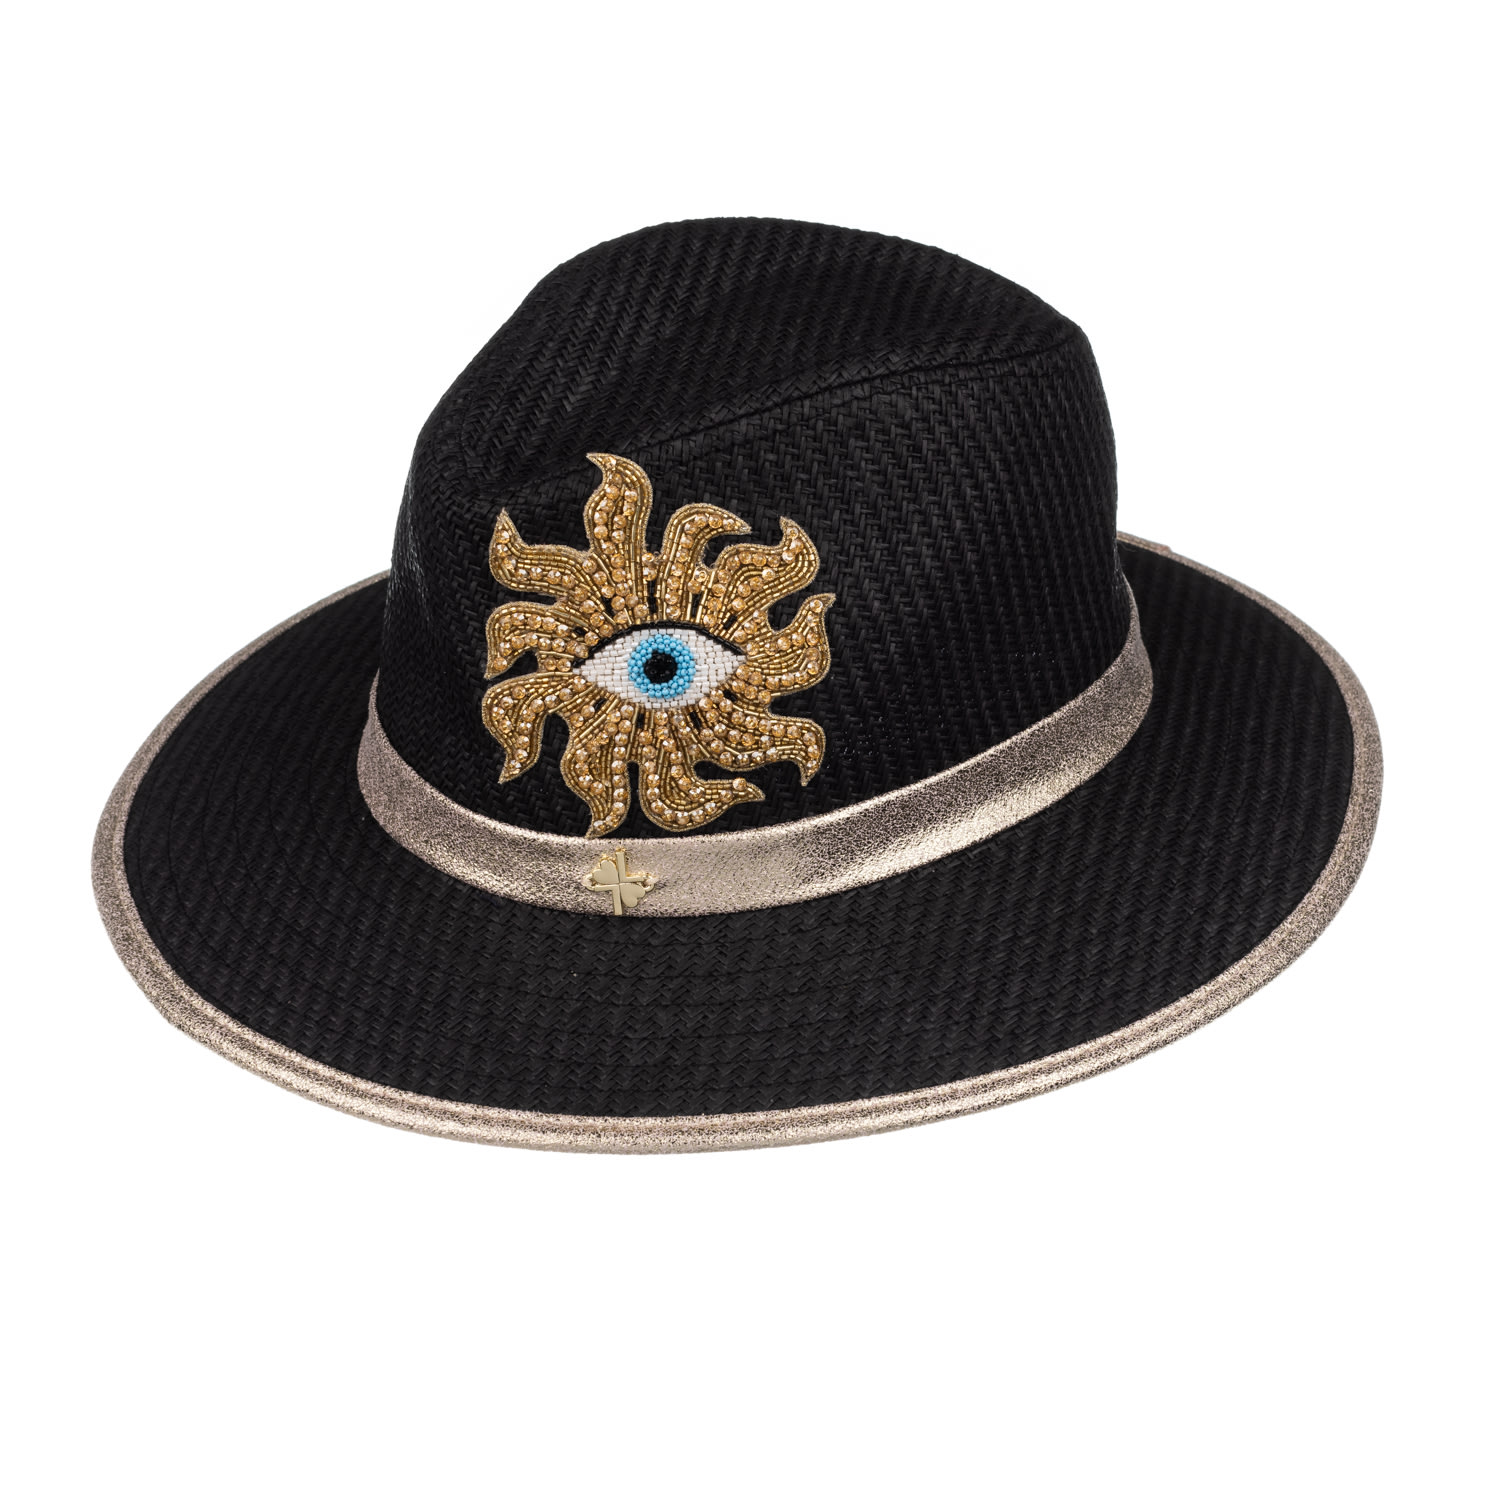 Women’s Straw Woven Hat With Couture Embellished Mystic Eye Design - Black One Size Laines London